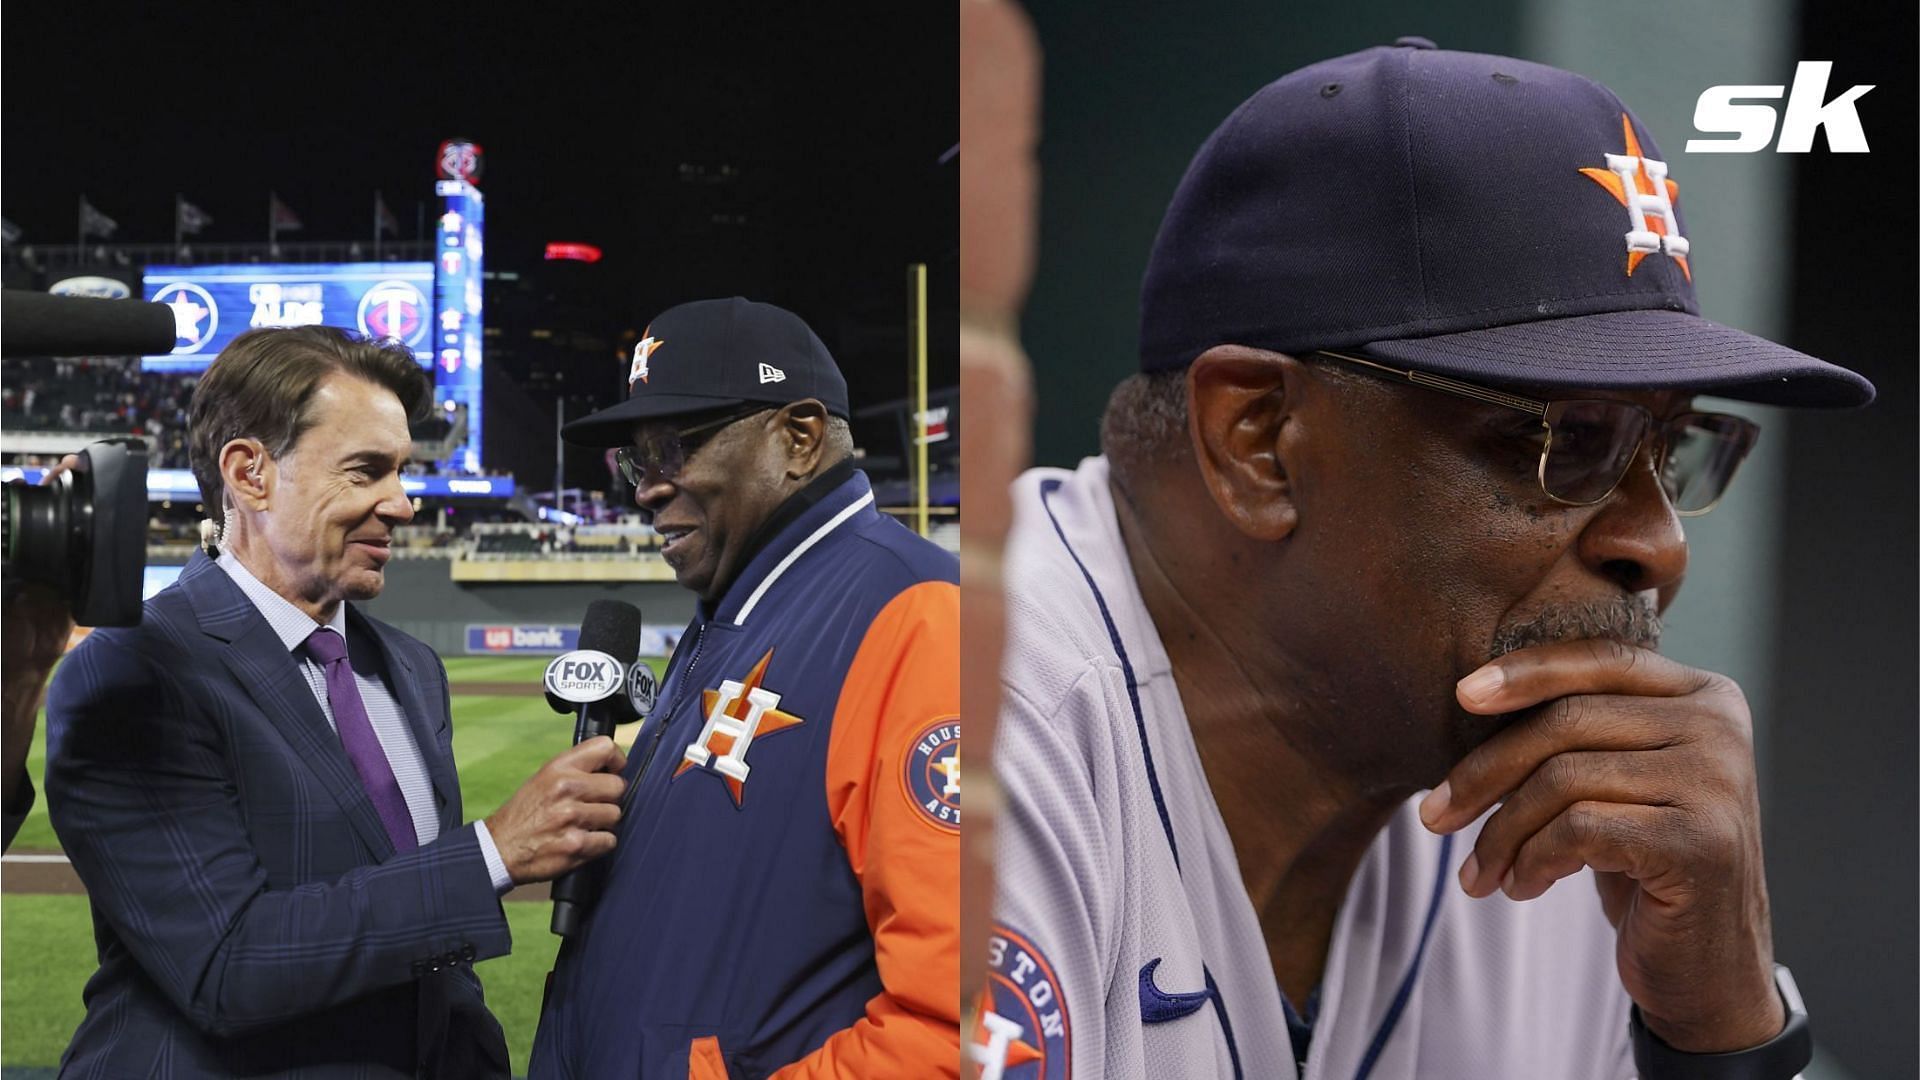 Dusty Baker said that his relationship with the media helped influence his decision to retire